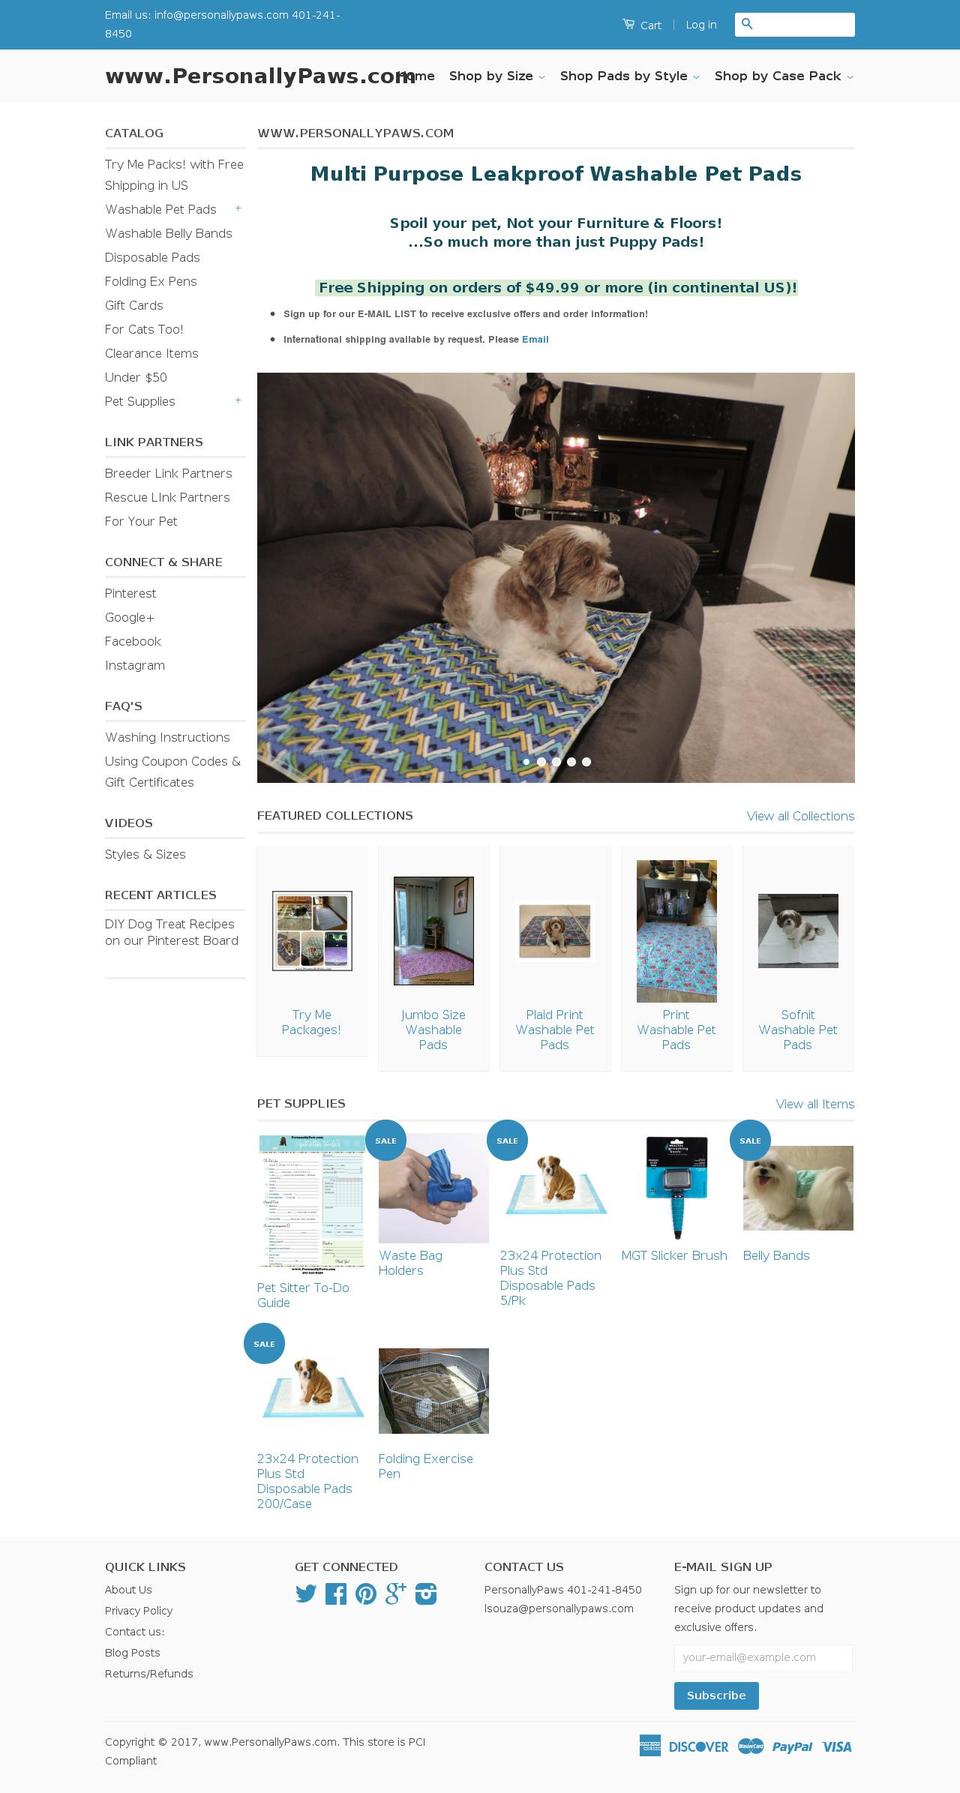 Refresh Shopify theme site example personallypaws.com